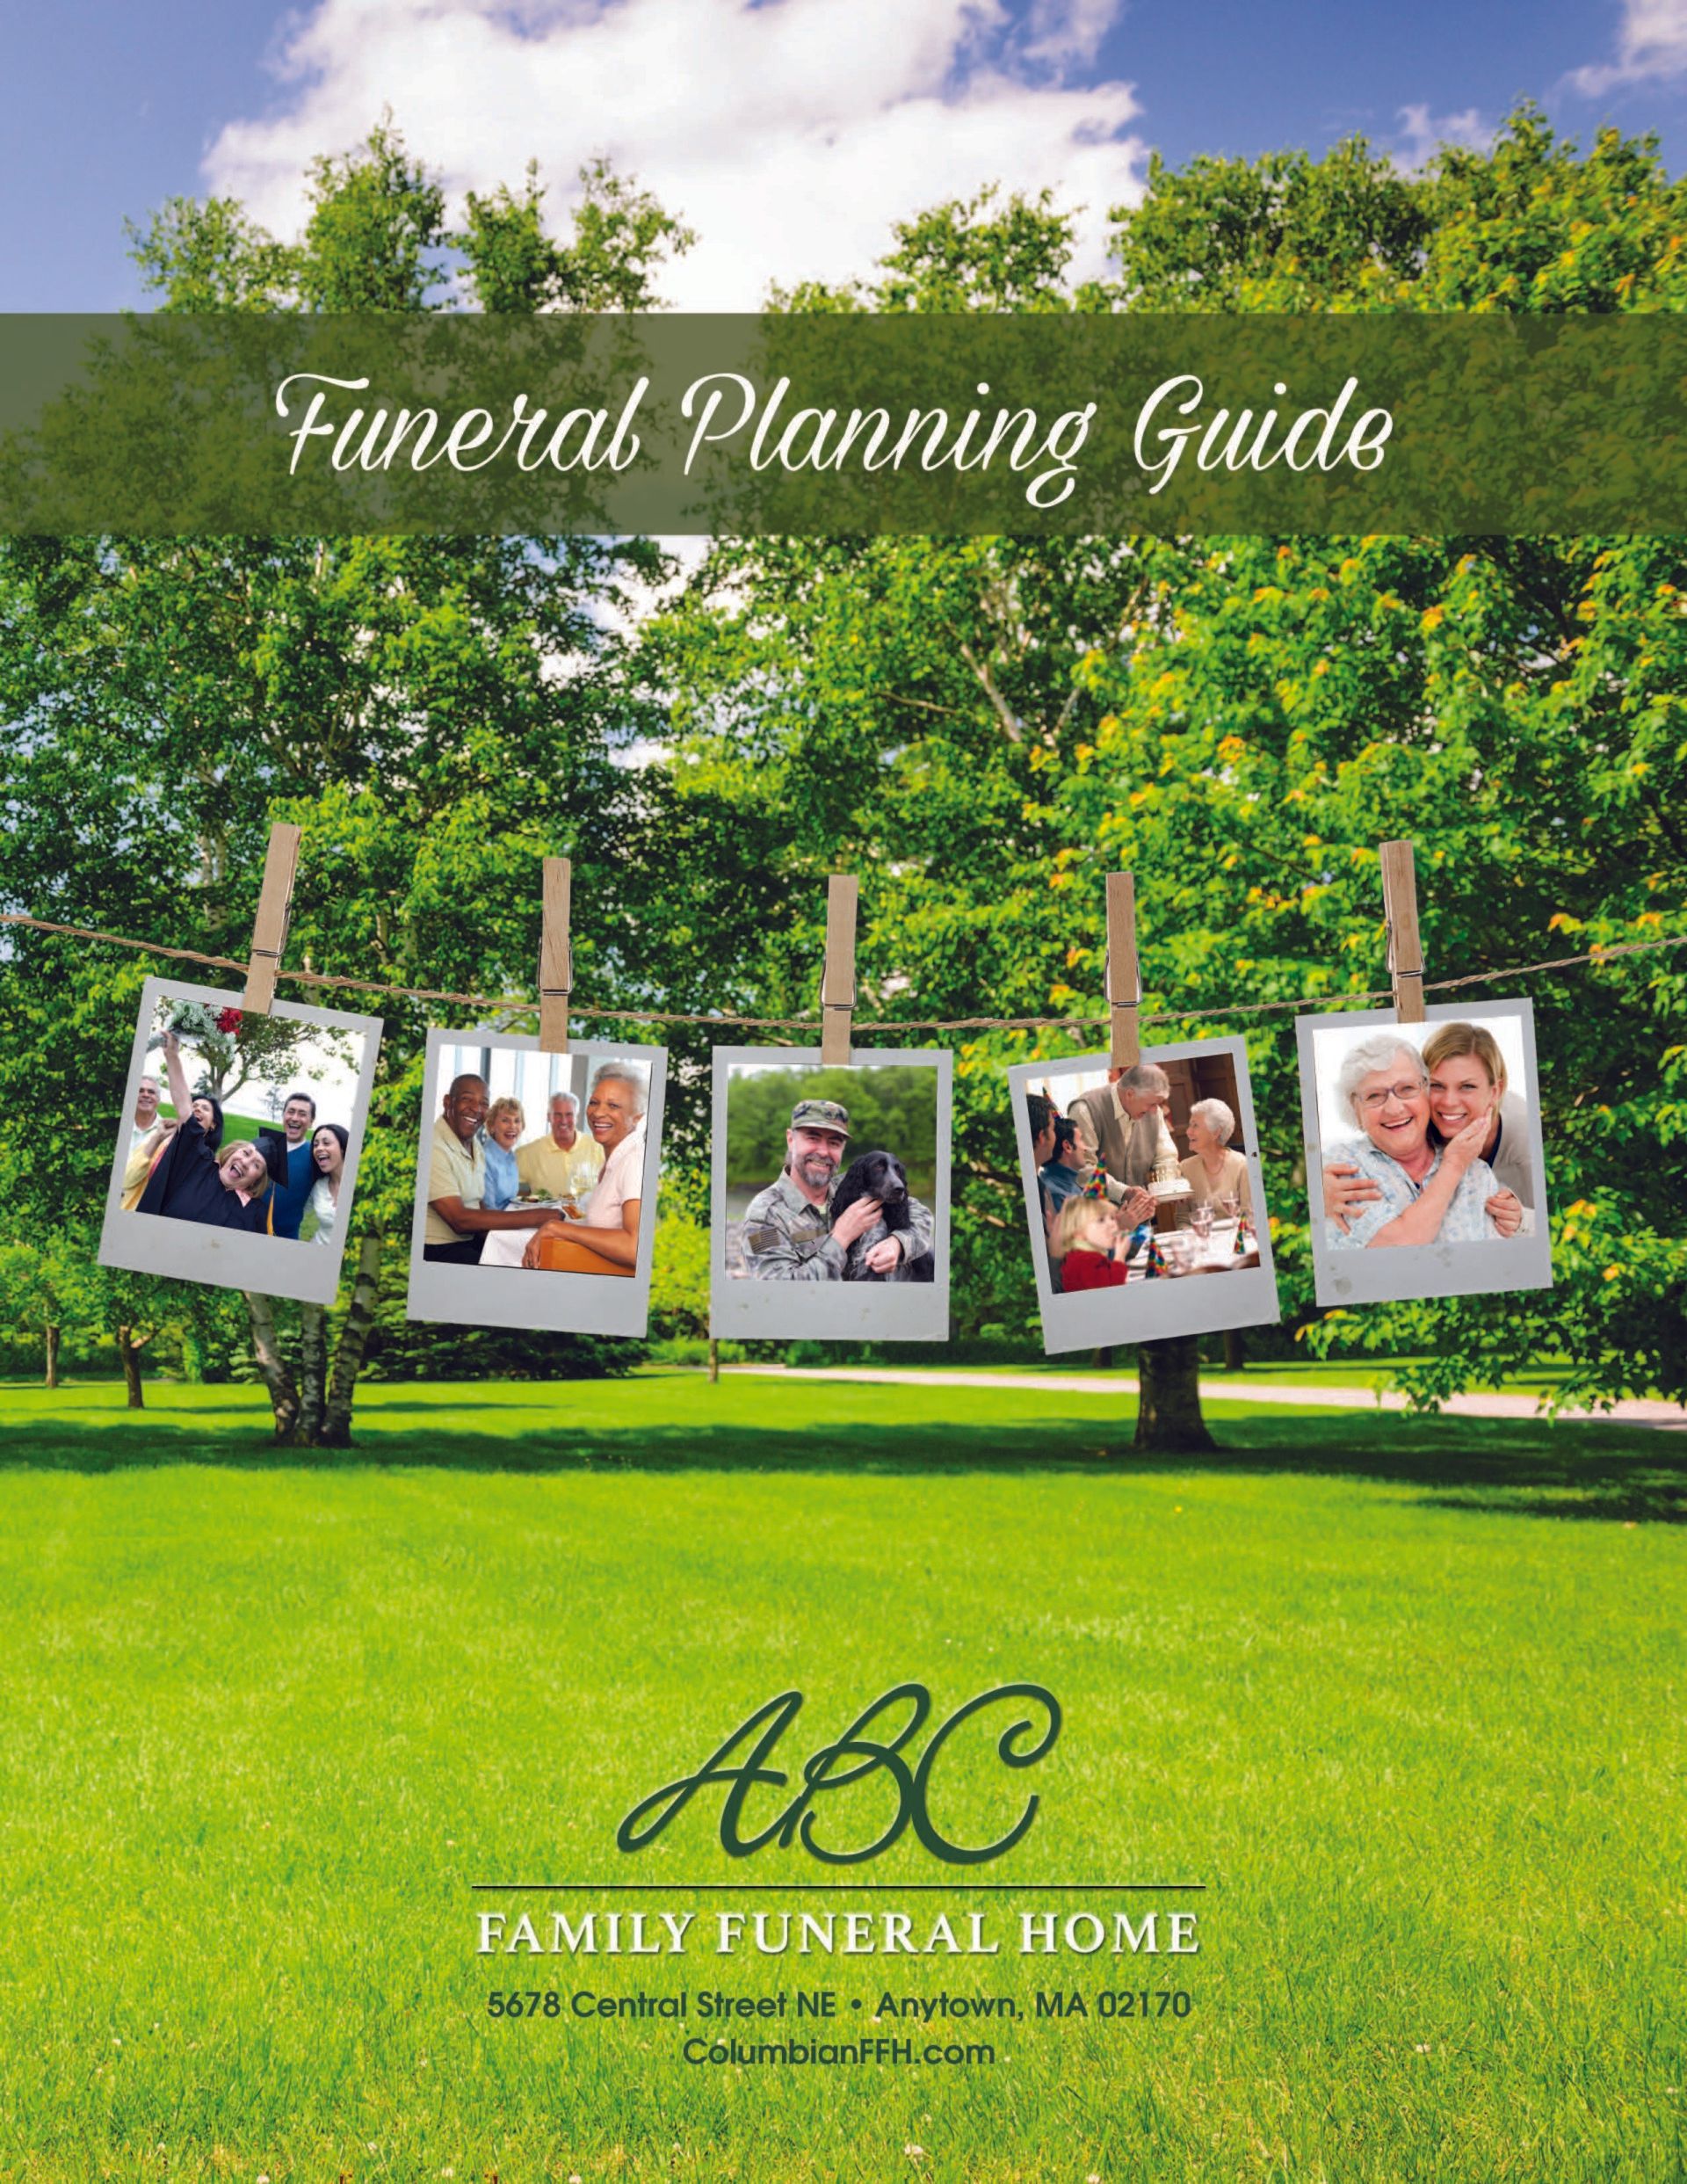 FAC Marketing Funeral Planning Guide